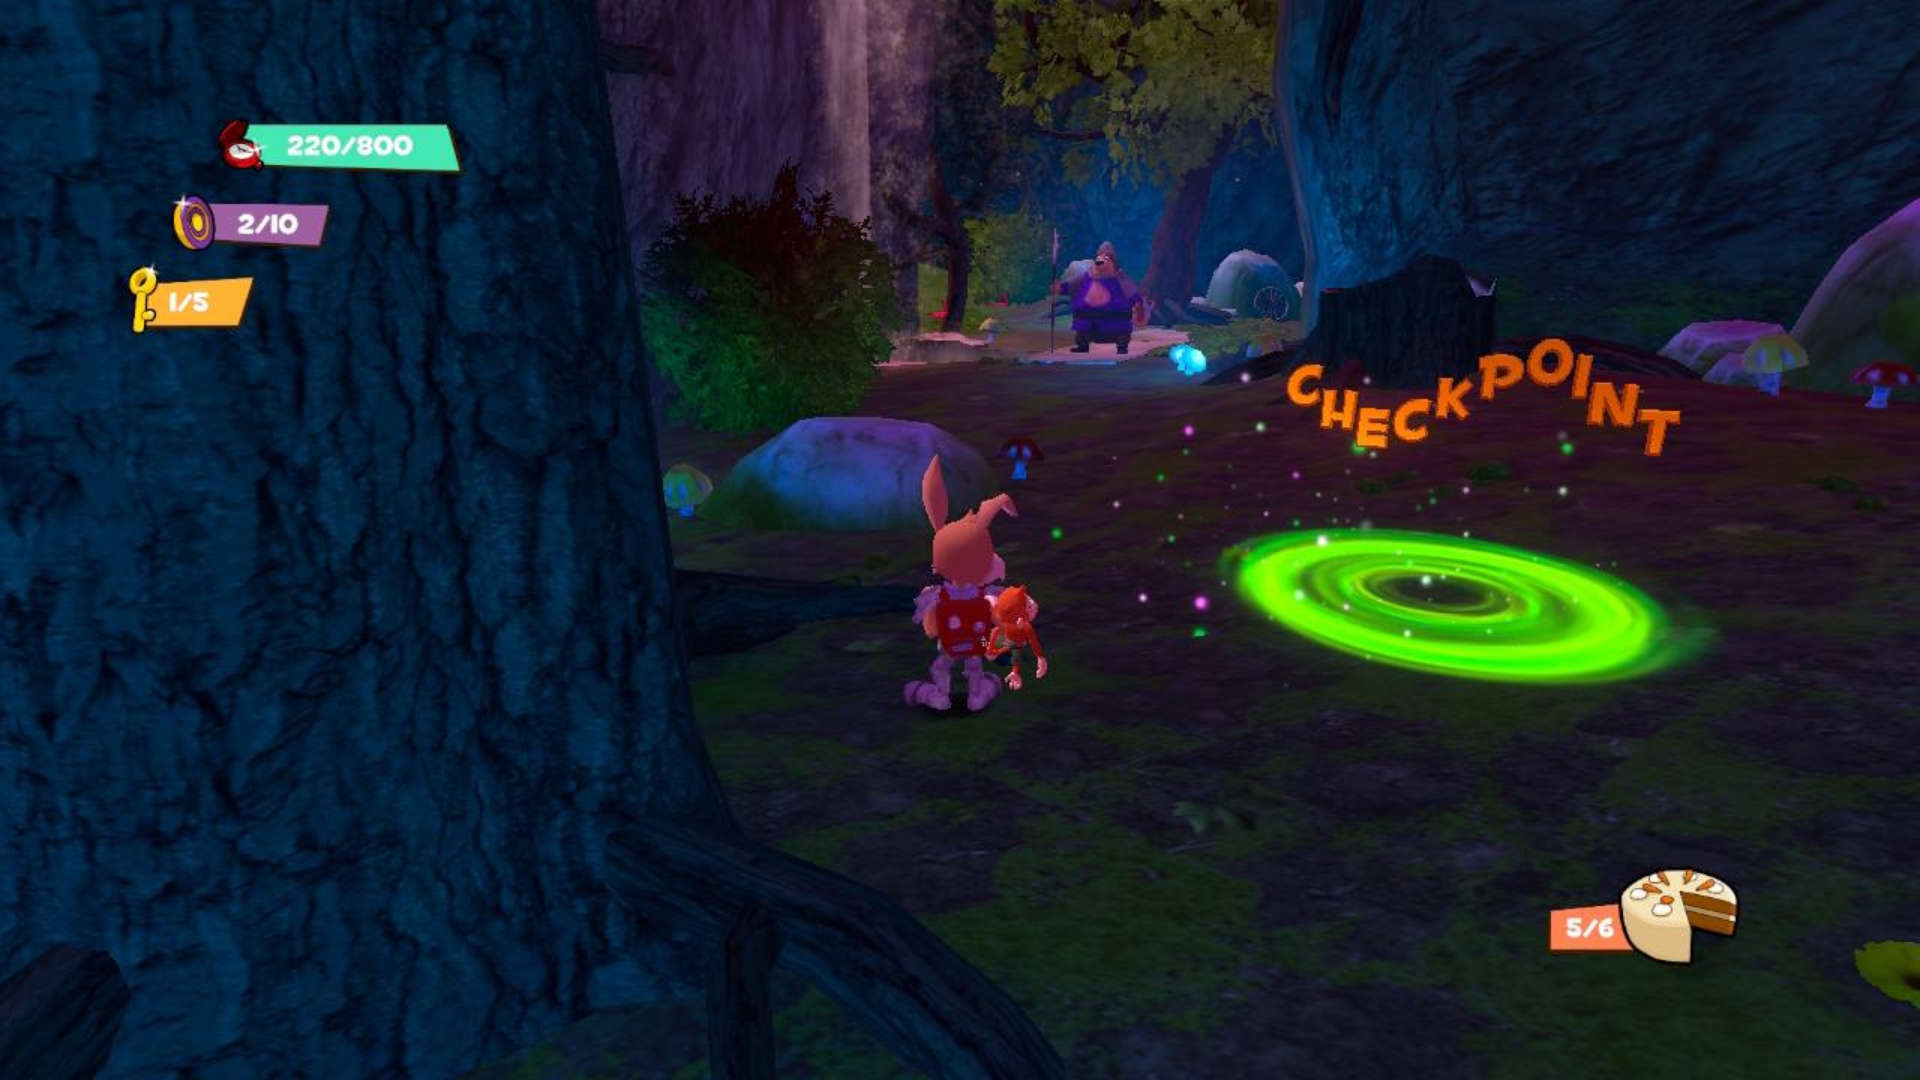 Clive 'N' Wrench review image showing the duo in a dark forest near a checkpoint.